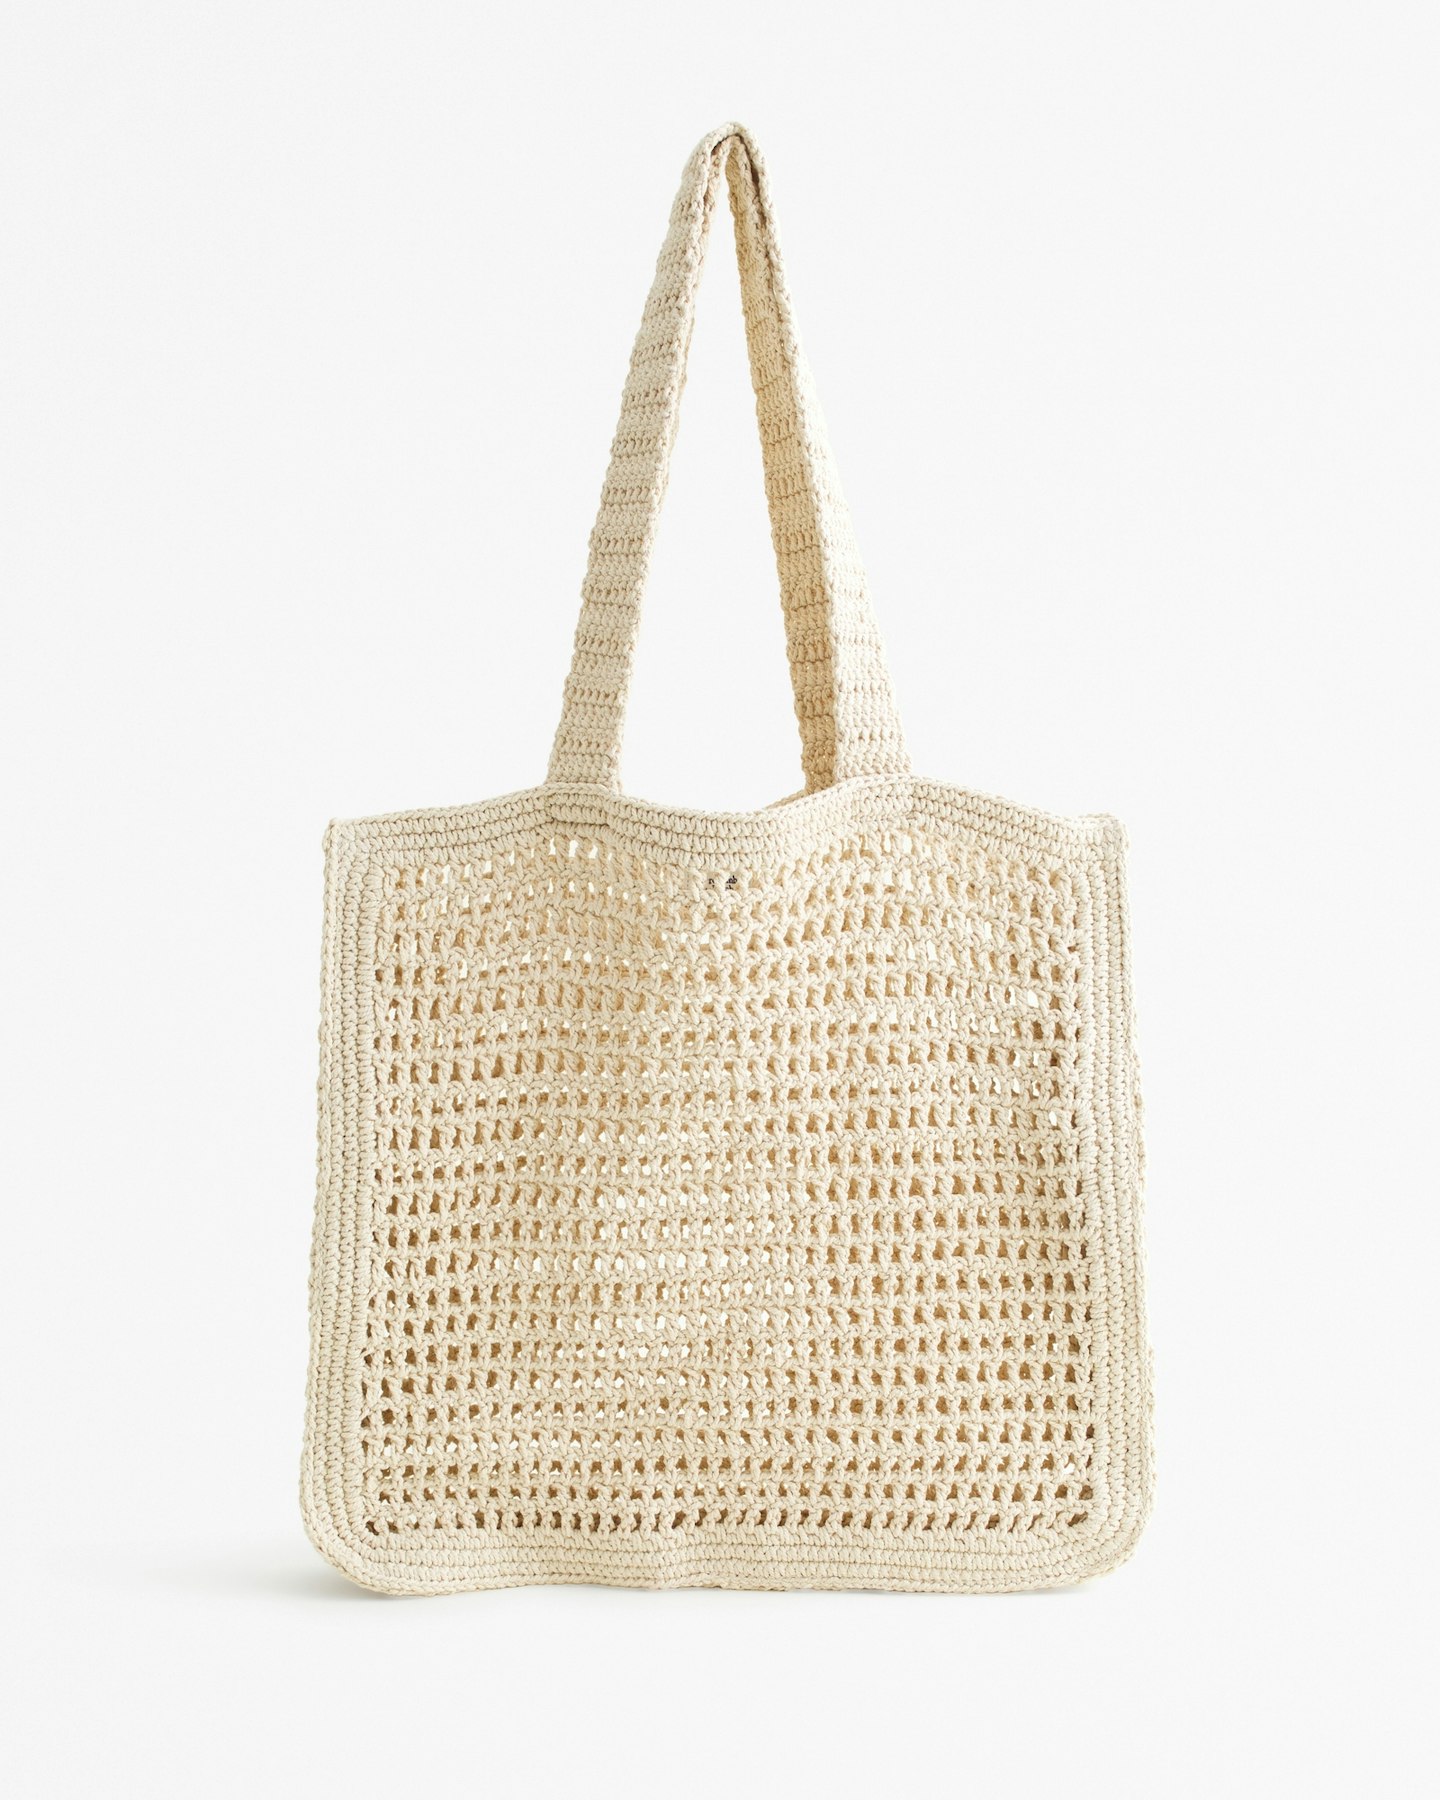 Abercrombie Crochet-Style Tote Bag